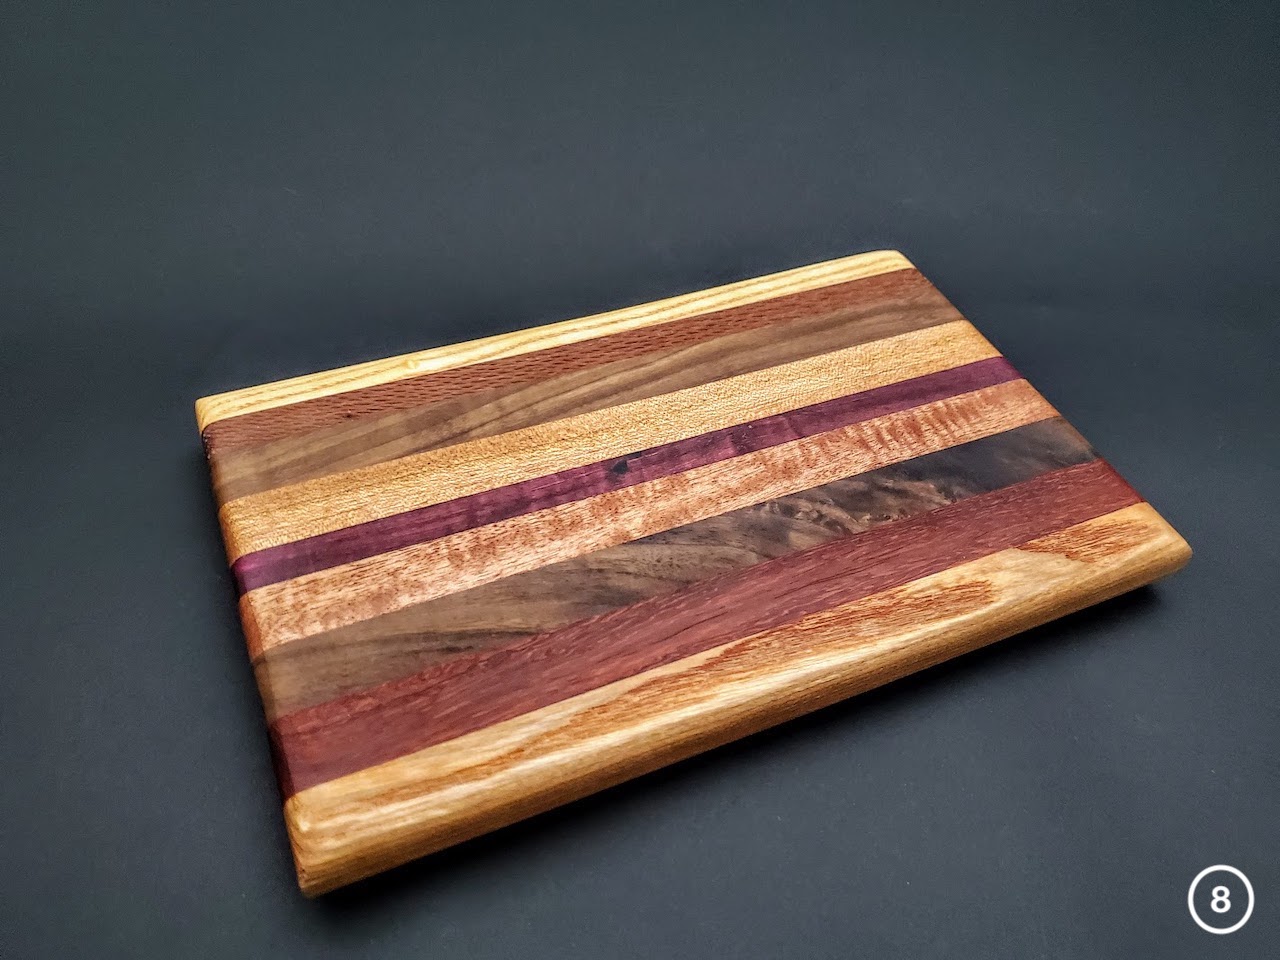 New: Hardwood Cutting Board - Small 10 x 8 Made in USA – MadeinUSAForever